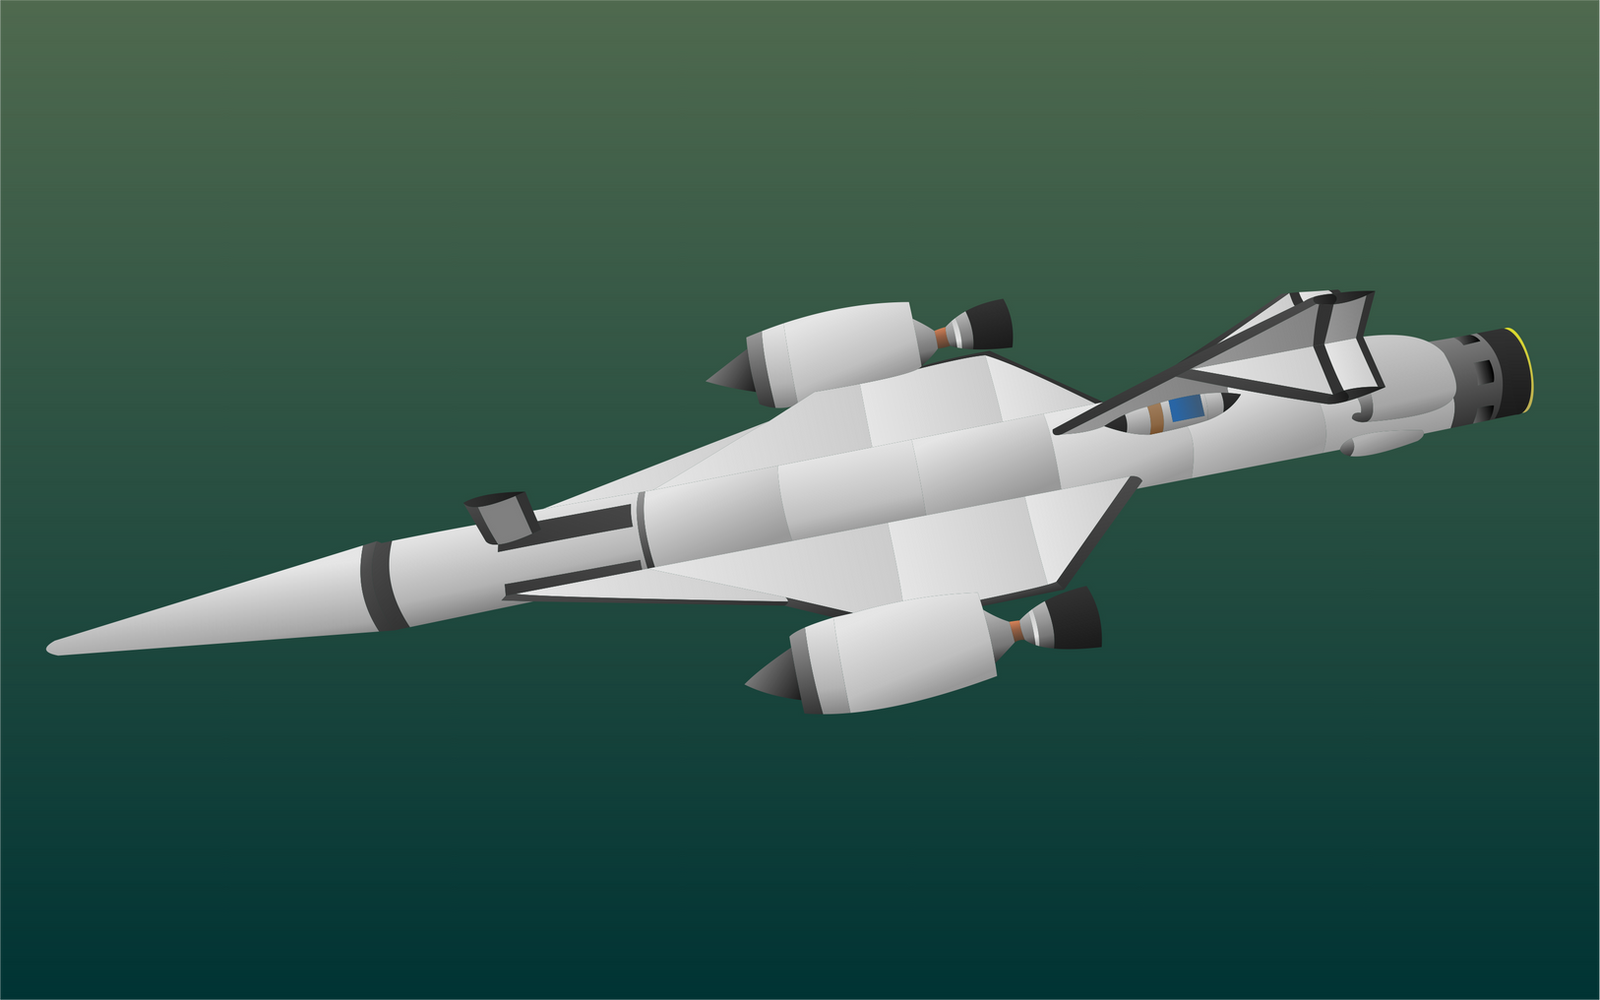 kerbal_space_program___ssto_by_luch_kot-